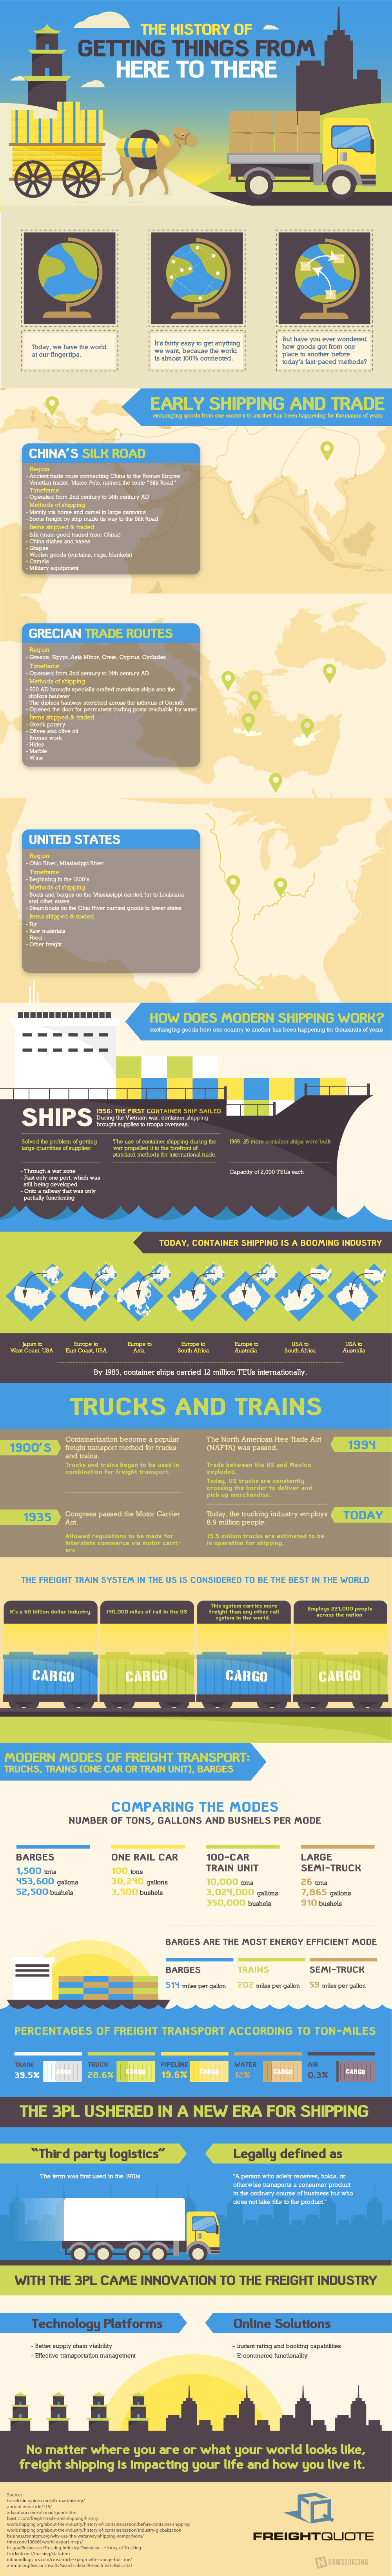 History_of_Freight_Shipping